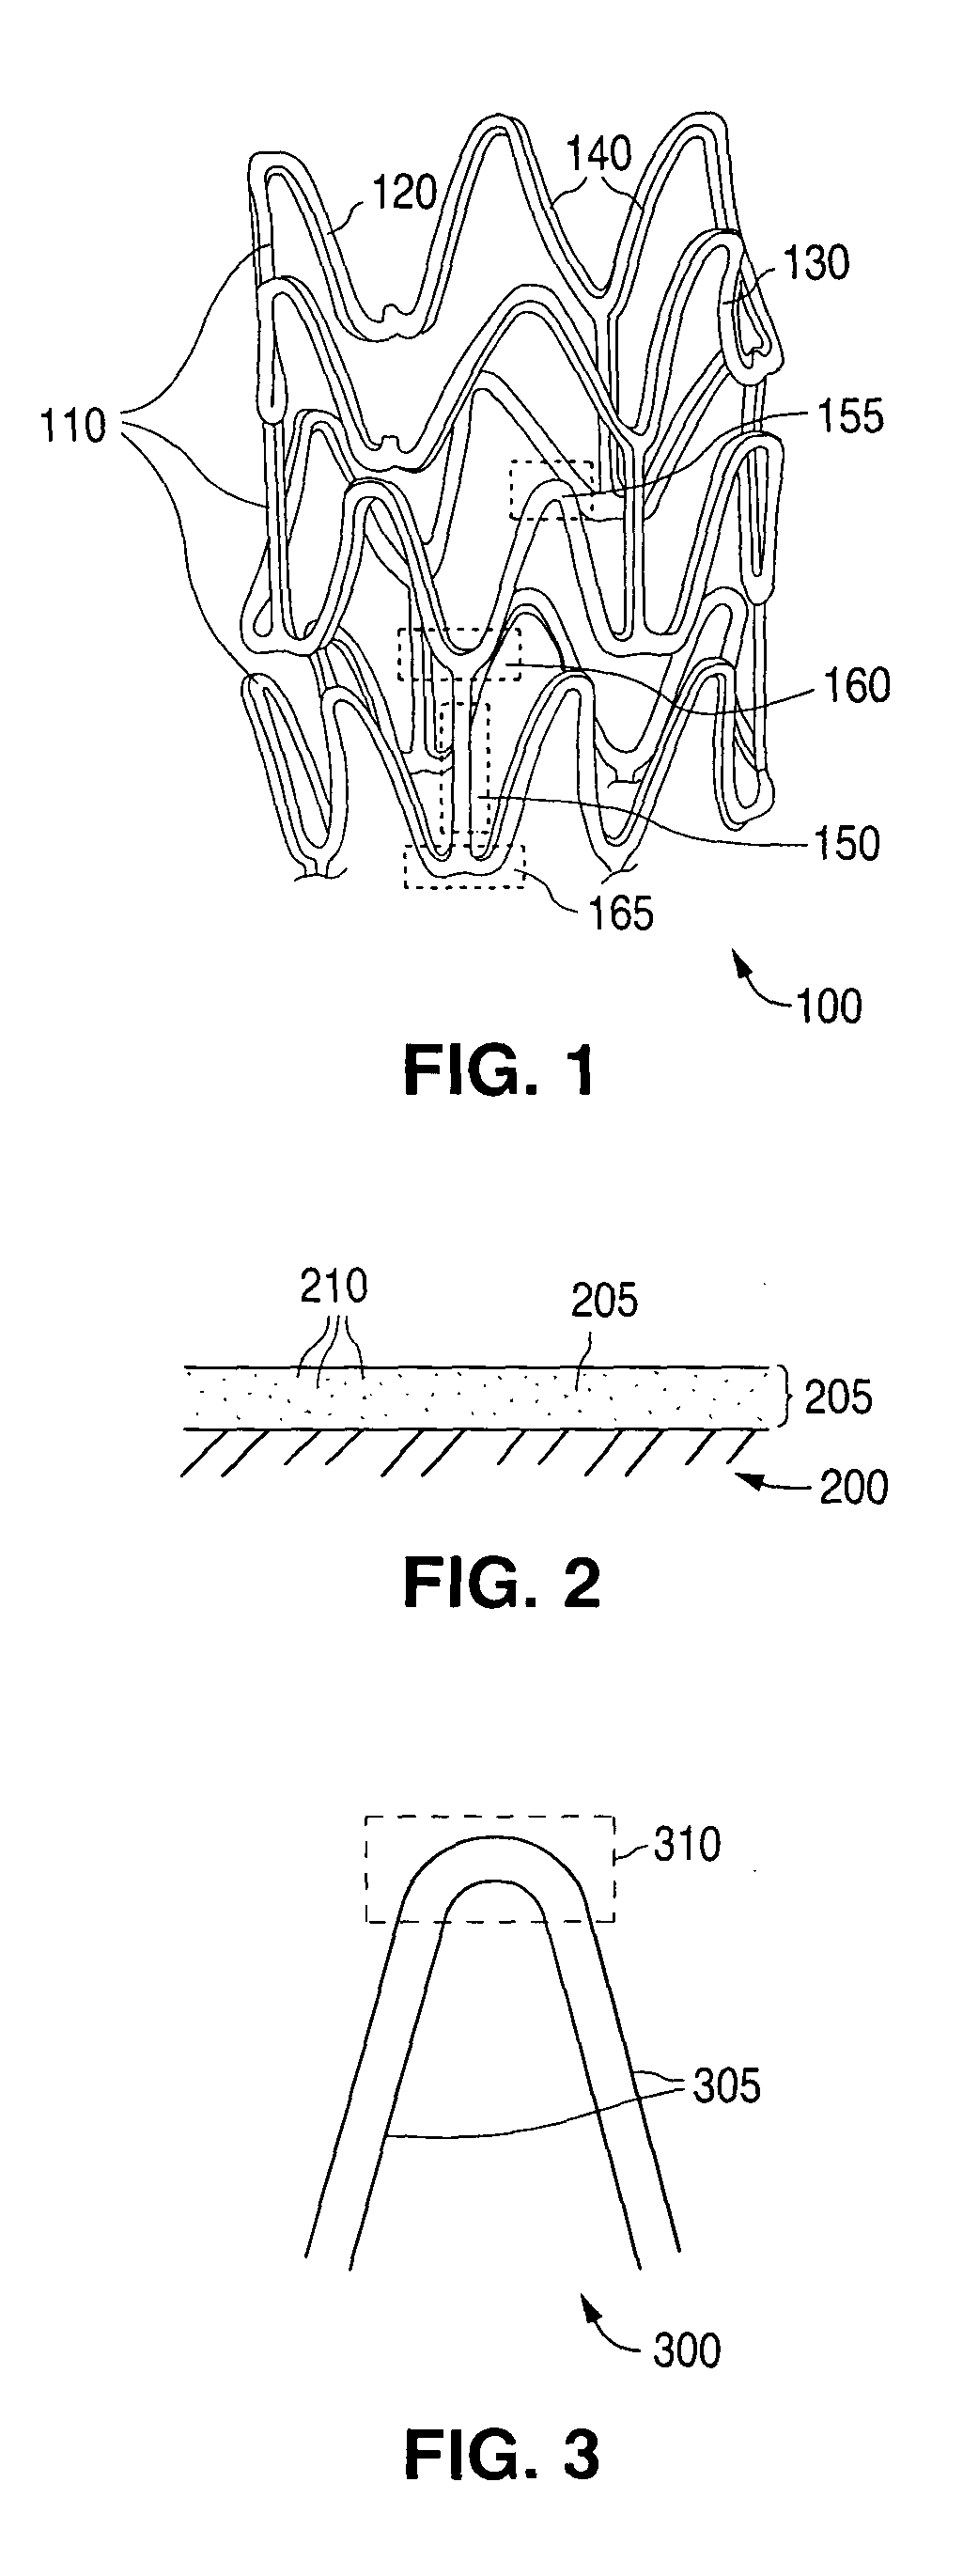 Modification of polymer stents with radiation